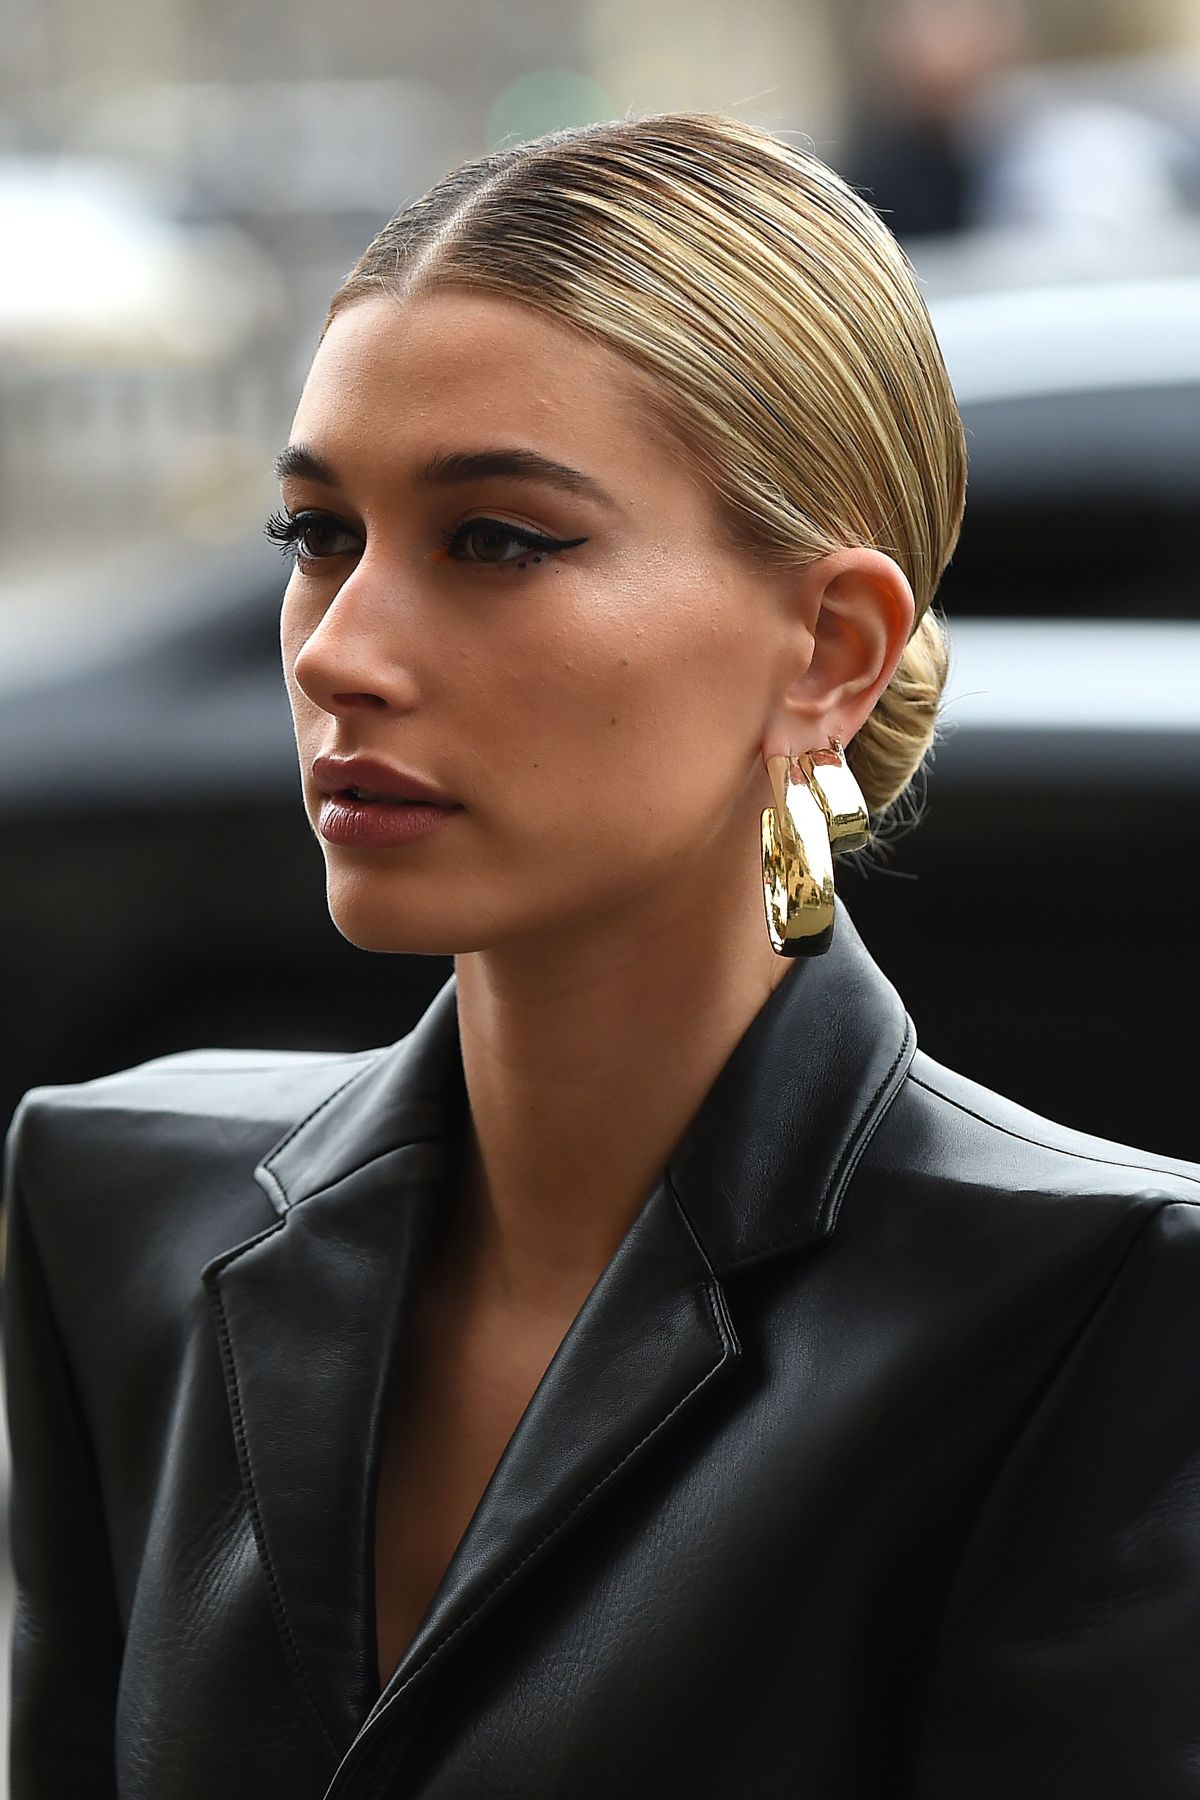 hailey-bieber-out-and-about-in-paris-03-03-2019-4.jpg